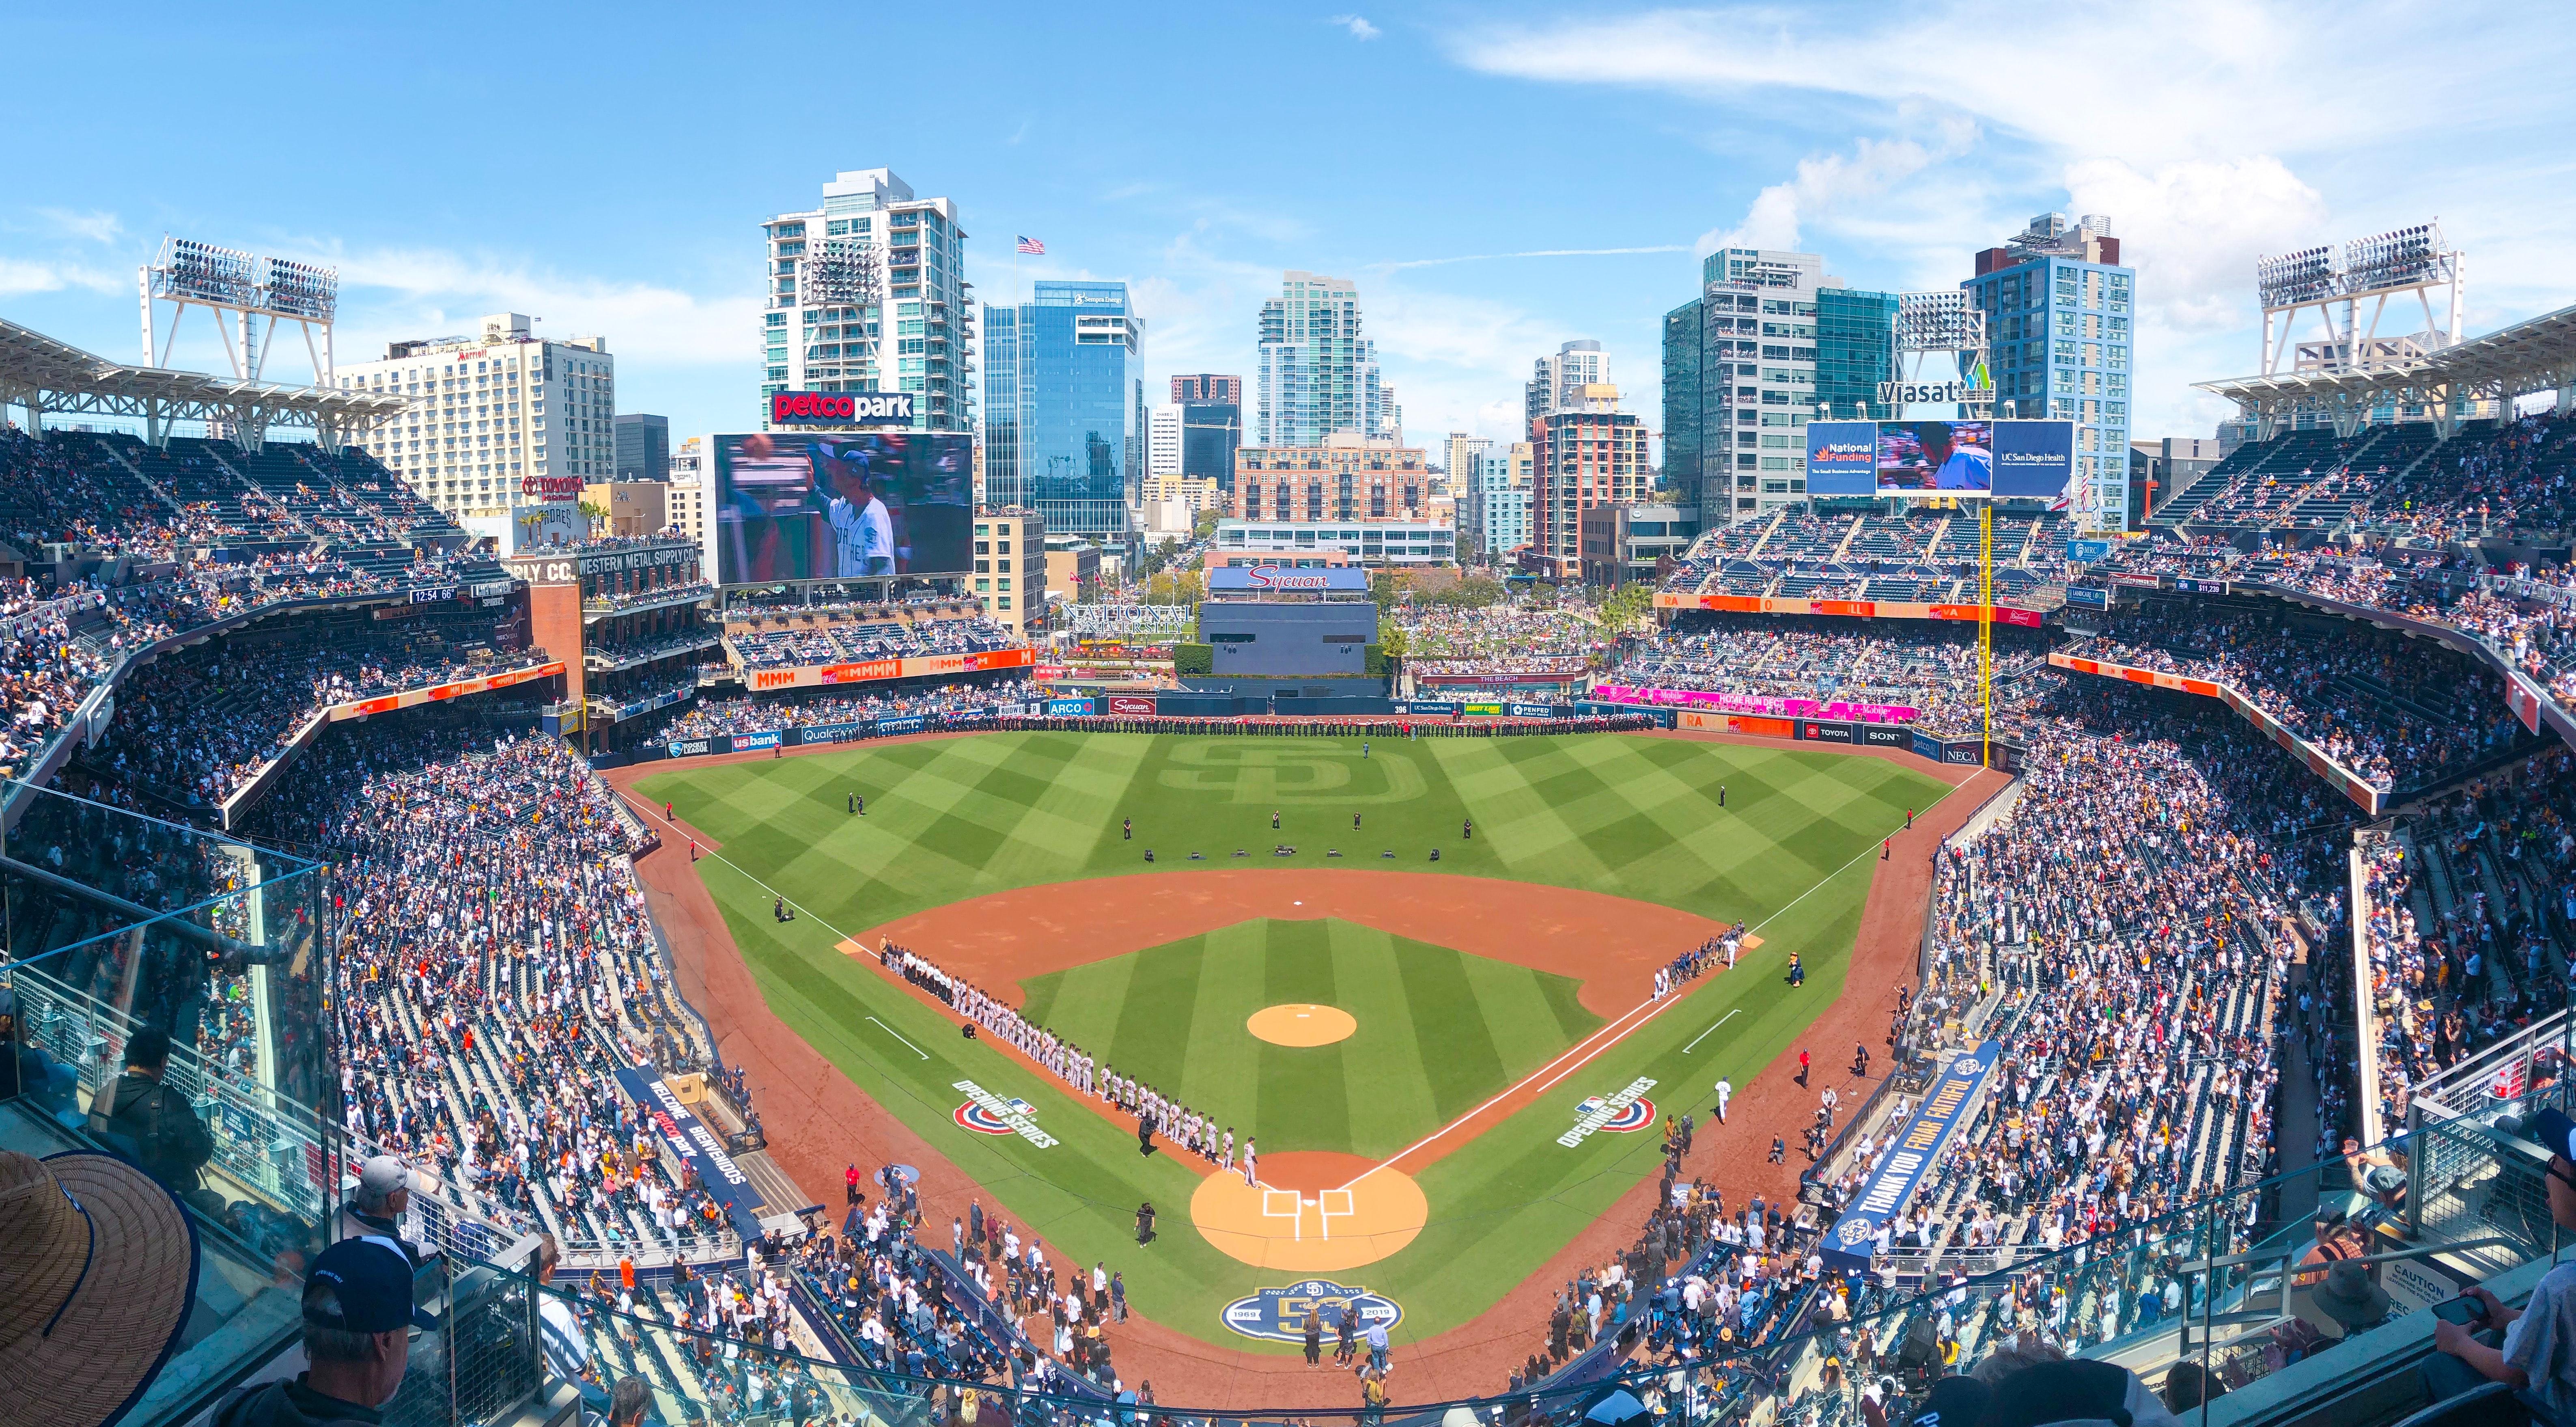 What's New at Petco Park in 2022. The San Diego Padres today